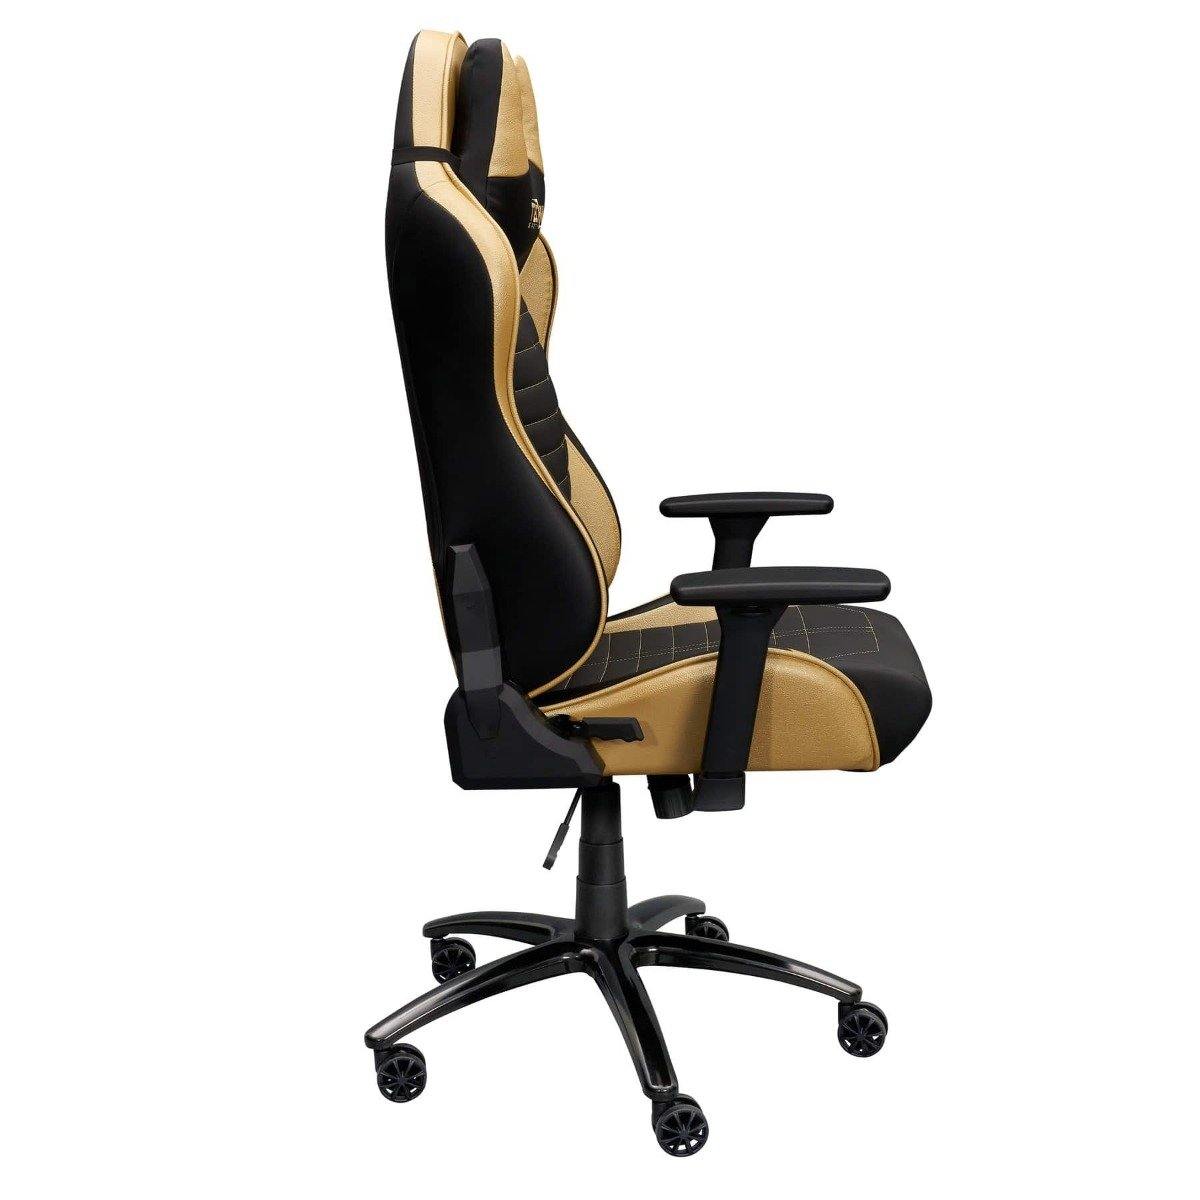 Techni Sport TS-62 Gold Ergonomic Racing Style Gaming Chair RTA-TS62C-GLD Side #color_gold